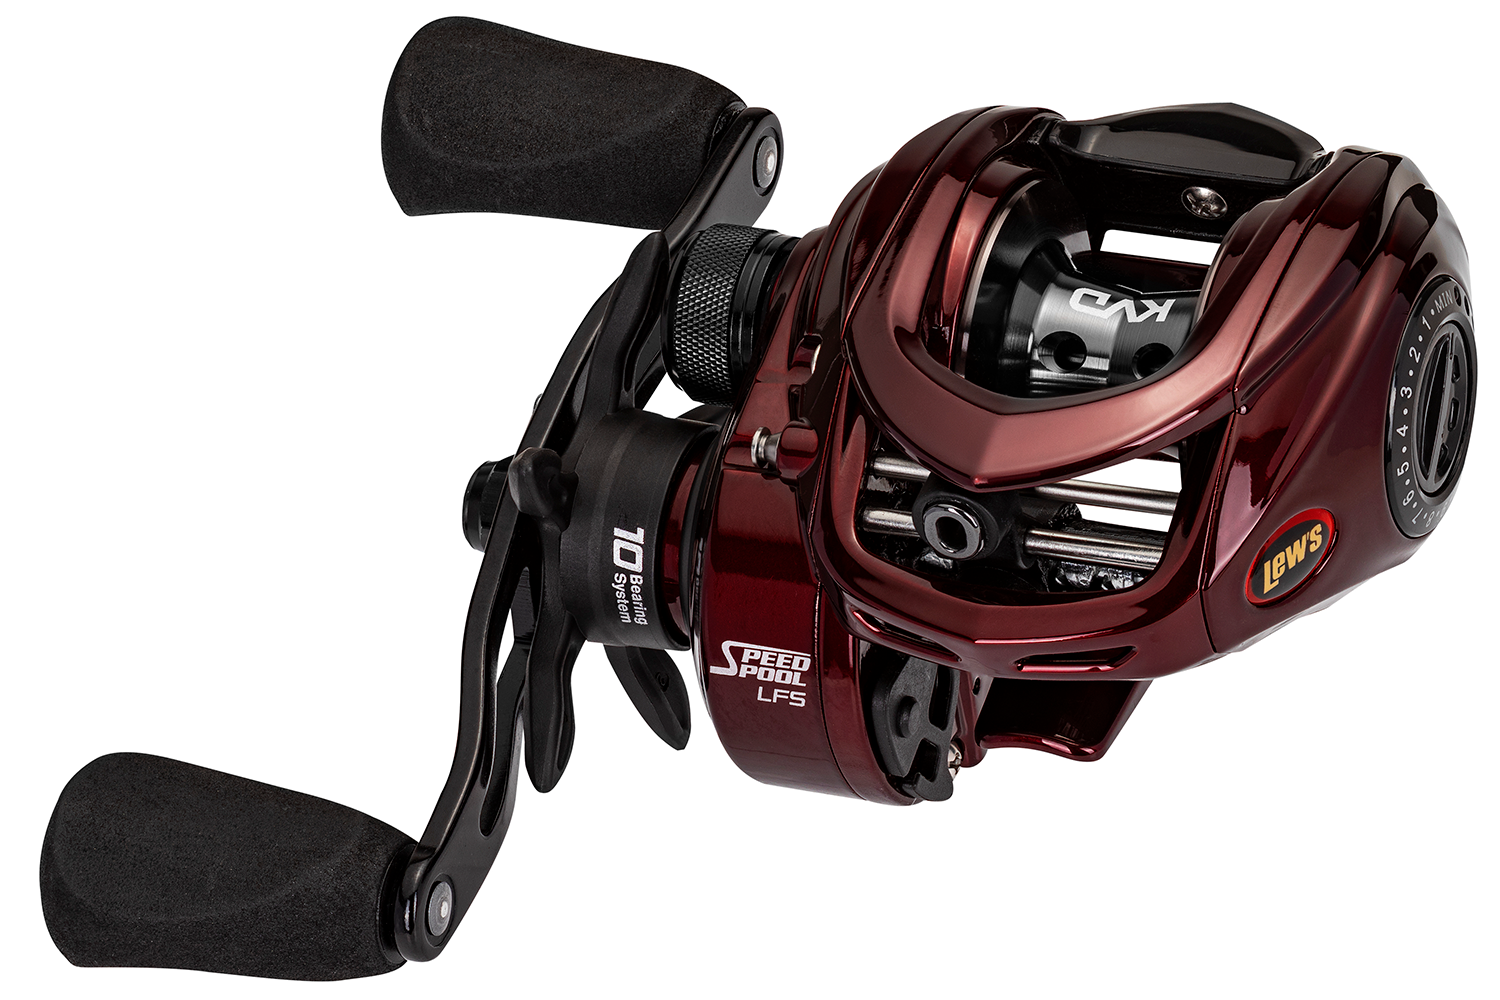 <p><b>Team Lews KVD Series Reels</b></p>
<p>Baitcasting models sport the following features; one-piece aluminum frame with easily removable palming graphite sideplate, a drilled, machine forged and anodized aluminum 34mm spool, high strength solid brass Speed Gears, P2 Super Pinion bearing supported pinion gear provides precise alignment and solid stability, resulting in a smoother operation and extended gear life, the Multi-Setting Brake (MSB) dual cast control system utilizes both an external click-dial for setting the magnetic brake, plus 4 individually disengaging, disk-mounted internal brake shoes that operate on centrifugal force, a premium 10 bearing system with stainless steel double shielded bearings and Zero Reverse one-way clutch, an anodized aluminum spool tension adjustment knob with audible click adjustment, the rugged carbon fiber drag system provides up to 20lbs. of drag power, bowed audible click drag star, anodized, bowed aluminum 95mm reel handle with EVA paddle knobs, oversized, Zirconia line guide, Lewâs patented retractable Speed Keeper bait keeper and an external lube port. </p>

<p>Spinning models will come with the following features; Premium 10-bearing system with 9 ball bearings and Zero Reverse one-way clutch bearing, all aluminum body and sideplate, Lewâs high strength and lightweight C40 Carbon skeletal speed rotor with aluminum bail wire and S-curve oscillation system, a double anodized braid ready knurled machined aluminum spool. Quality, solid brass pinion gear, durable stainless steel main shaft with external stainless steel screws, DuraMax drag system provides a smooth, powerful, and consistent drag for unmatched stopping power, right or left-hand adjustable aluminum handle with an EVA handle knob, Lewâs, Speed Lube for exceptional smoothness and uninterrupted performance in all weather conditions, from extreme heat to freezing cold. Will be available at fishing tackle retailers beginning in the fall of 2020.</p>
<p><a href=